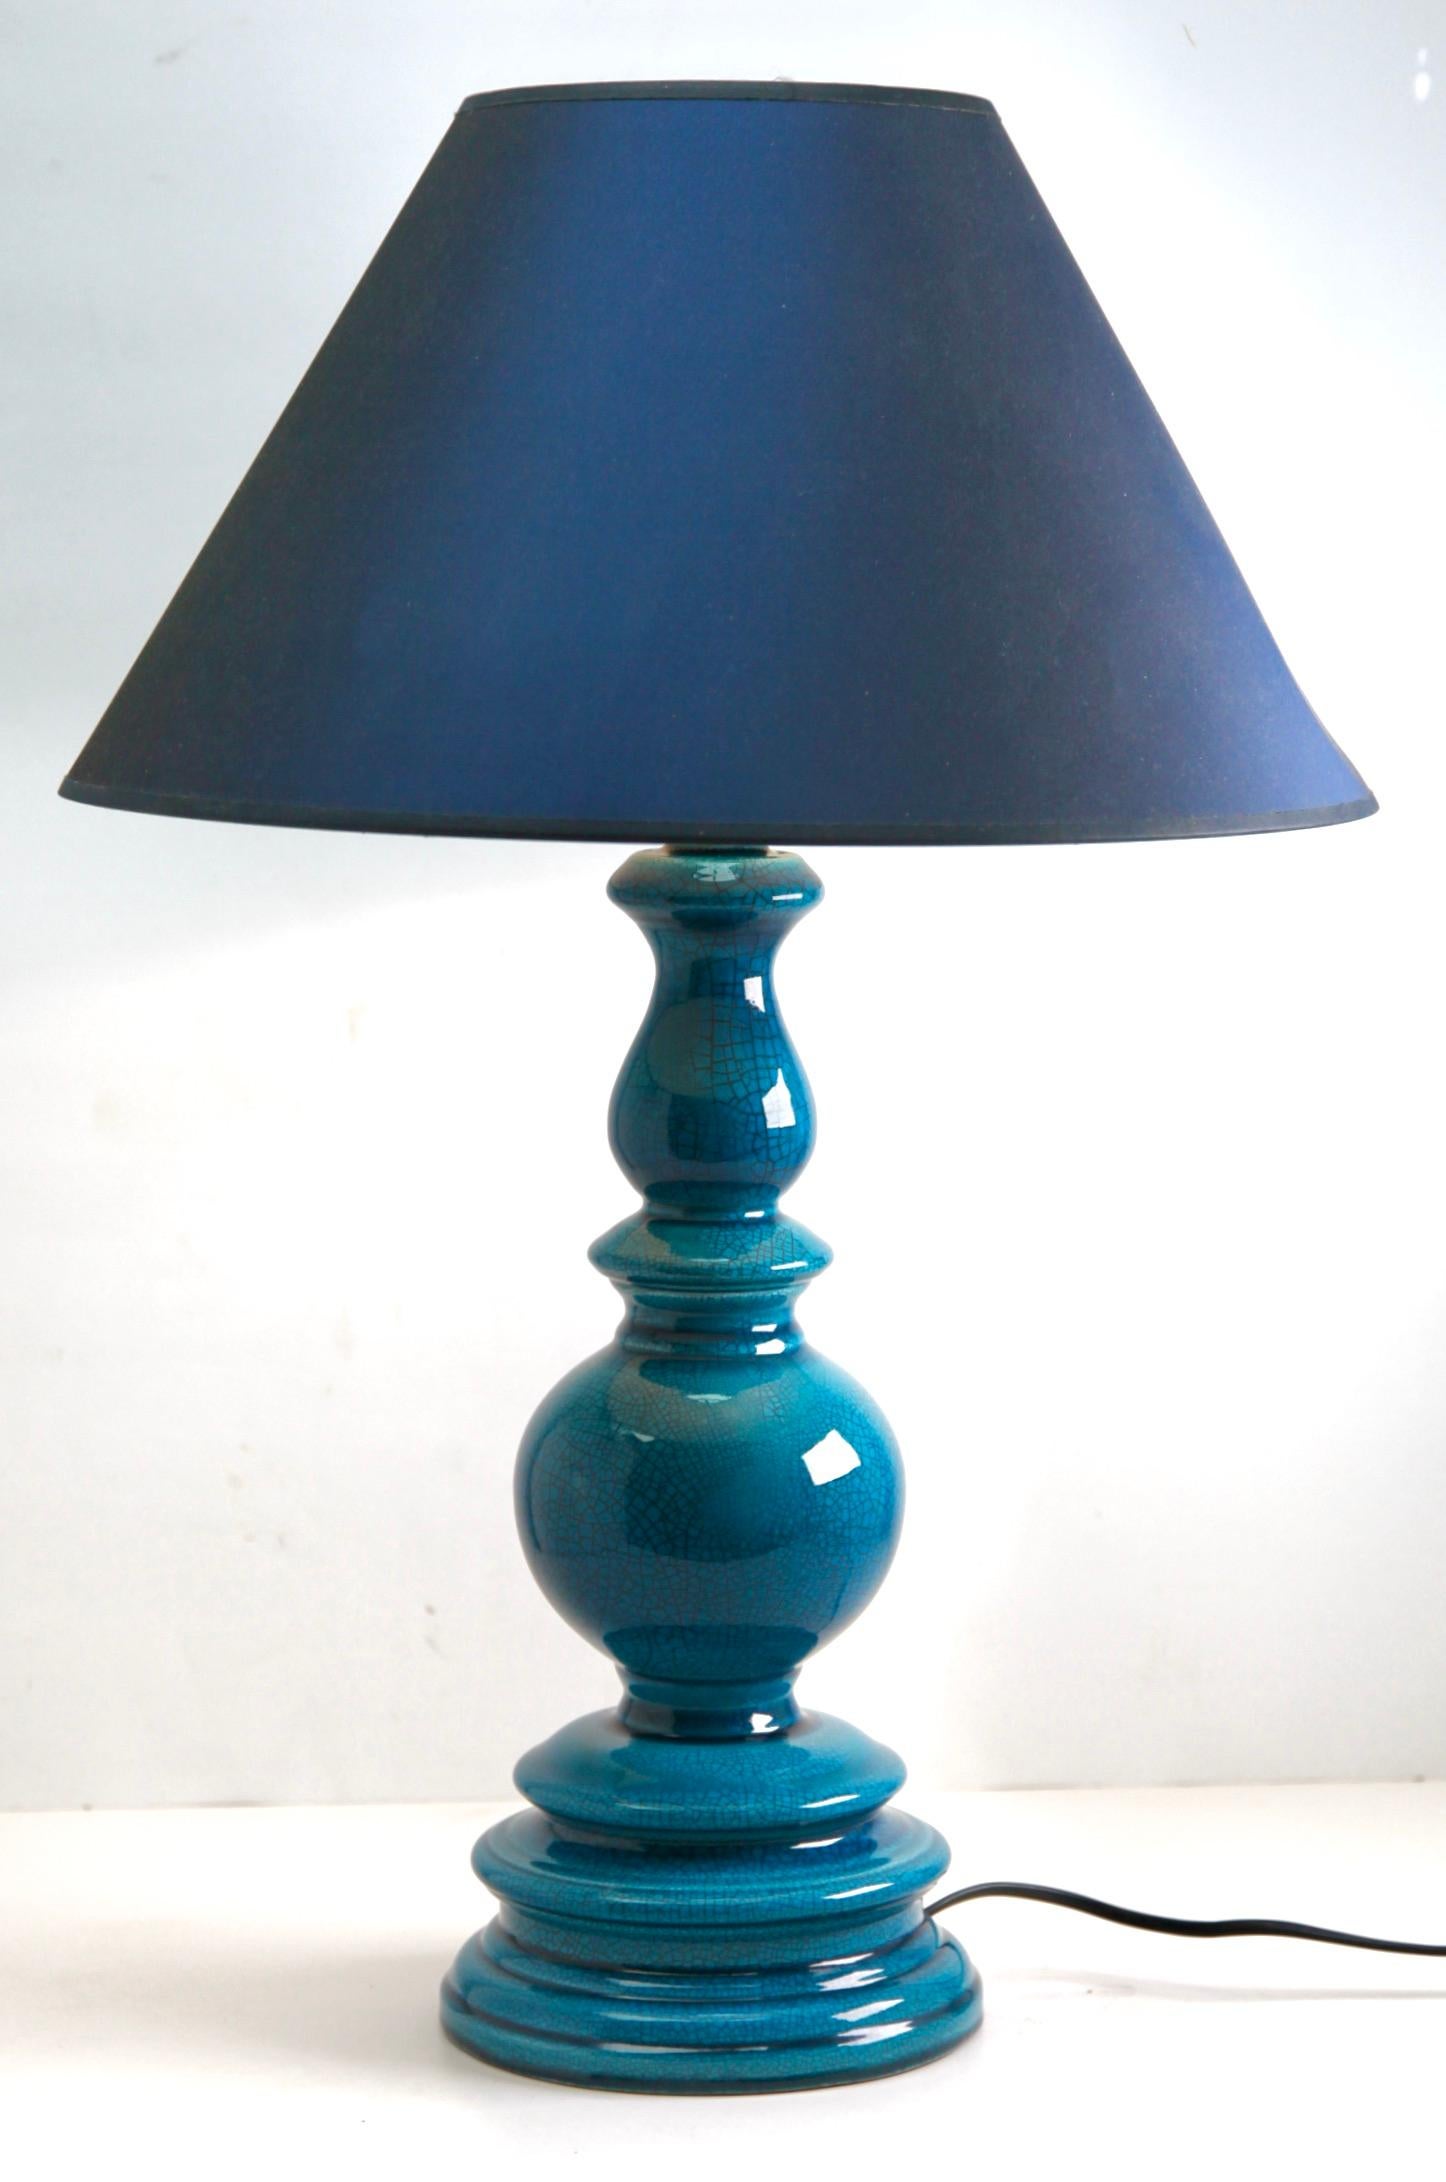 Inspired by a centuries-old technique of Chinese ceramics, this elegant table lamp is a bright and dramatic shade of turquoise with a fine crackle glaze. 
The dimensions are measured without a lampshade.

Renewed and rewired with lamp fitting